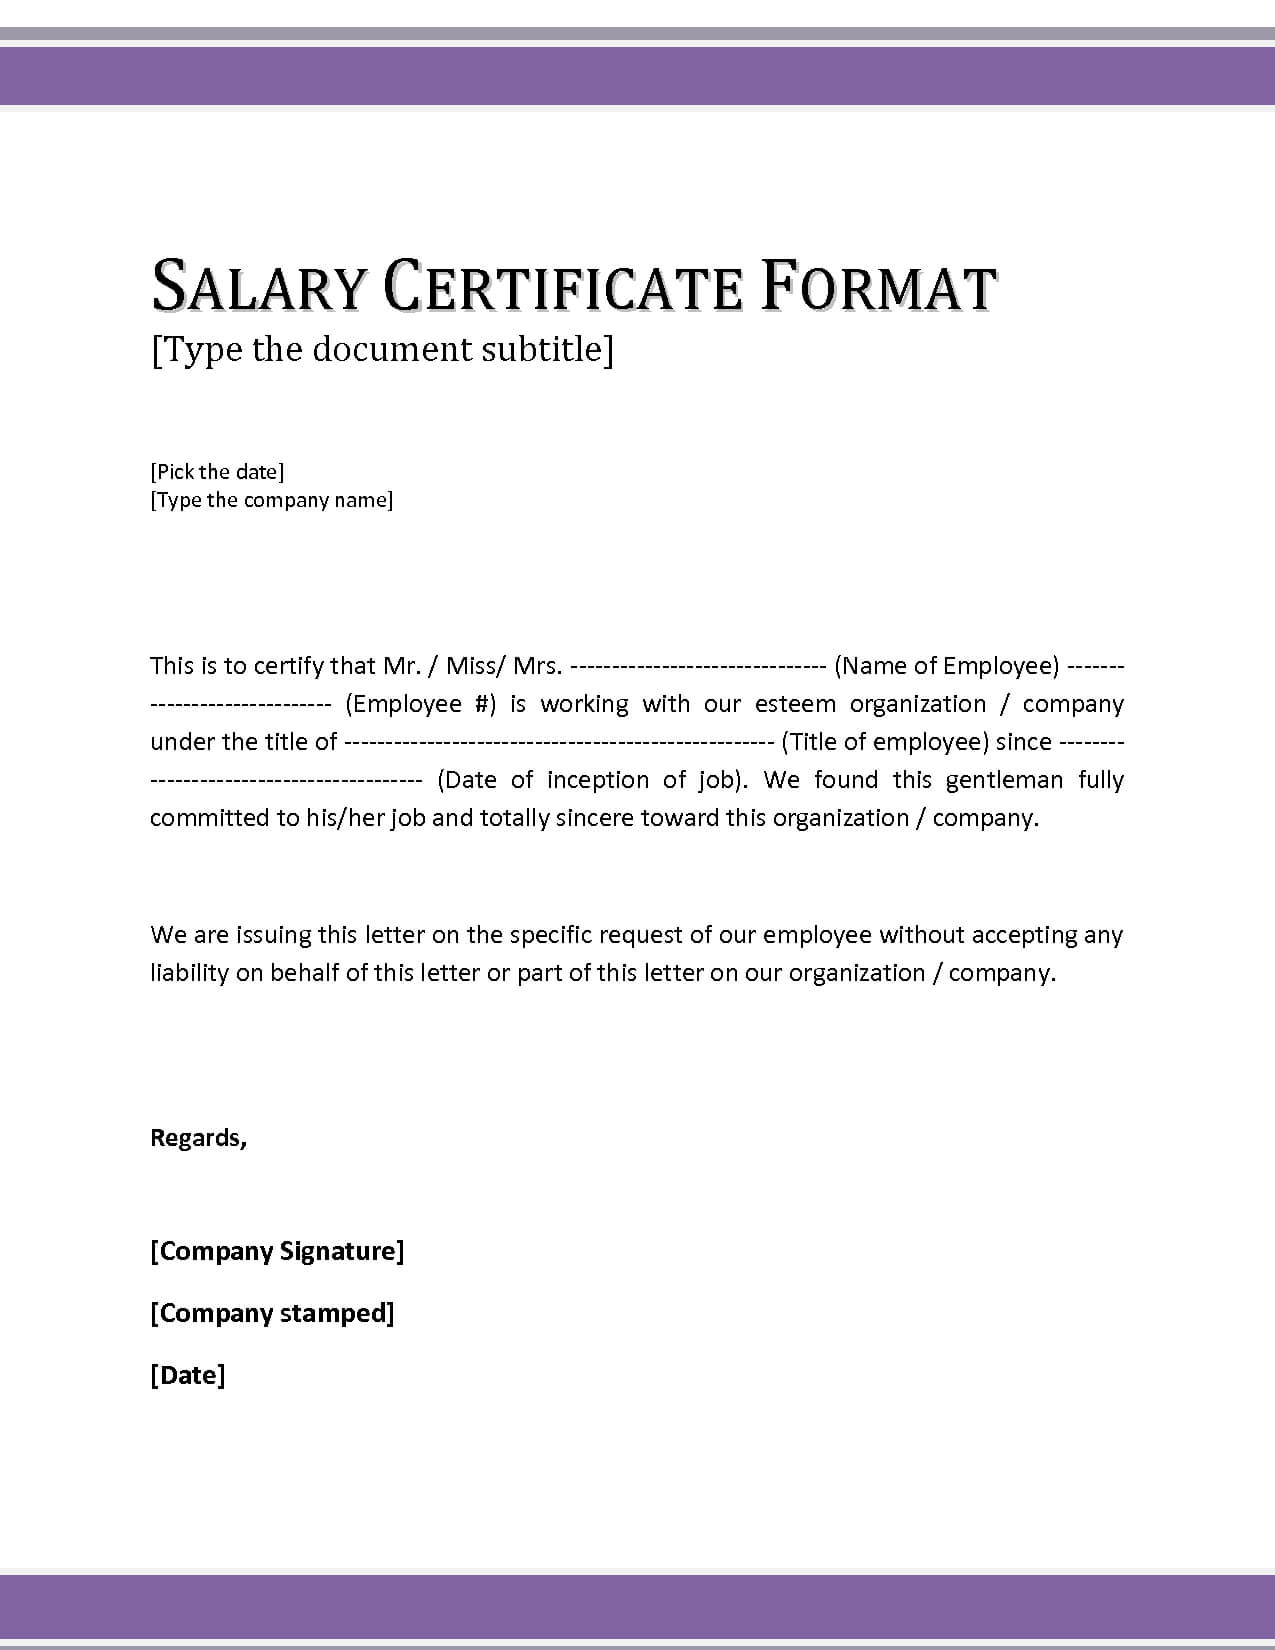 Promotion Certificate Template ] – Share Certificate Intended For Promotion Certificate Template